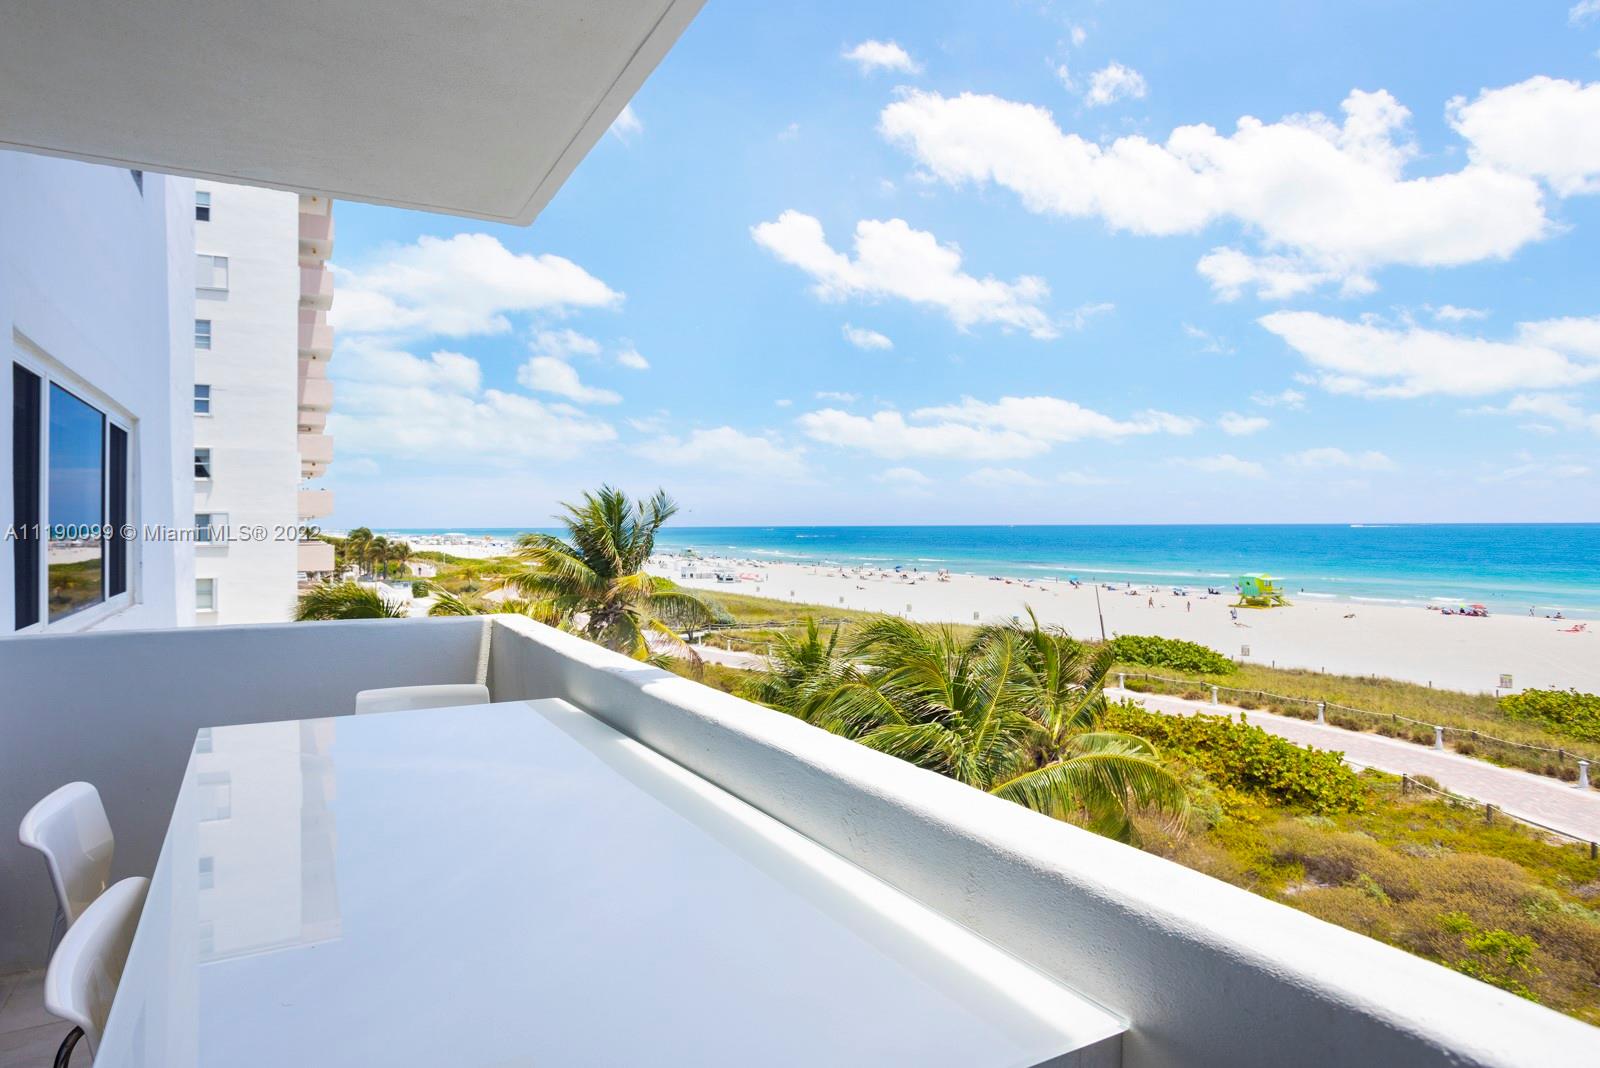 A one-of-a-kind opportunity and a rare find of two combined units with direct beach and ocean access in the exclusive South of Fifth community. If your dream is to live in South Beach, Miami, with a direct view of the ocean, this is the residence for you. The boutique building is superbly situated in front of the Atlantic Ocean. Tastefully renovated by an Italian designer with an open view from the kitchen and dining/living area. Three bedrooms (one considered den size). Miele and Subzero appliances are combined with beautiful, refined white cabinetry. South Pointe Park, a 17-acre county urban park, is only two blocks away. It is regarded as one of the best places to live. Building has NO pool NO gym